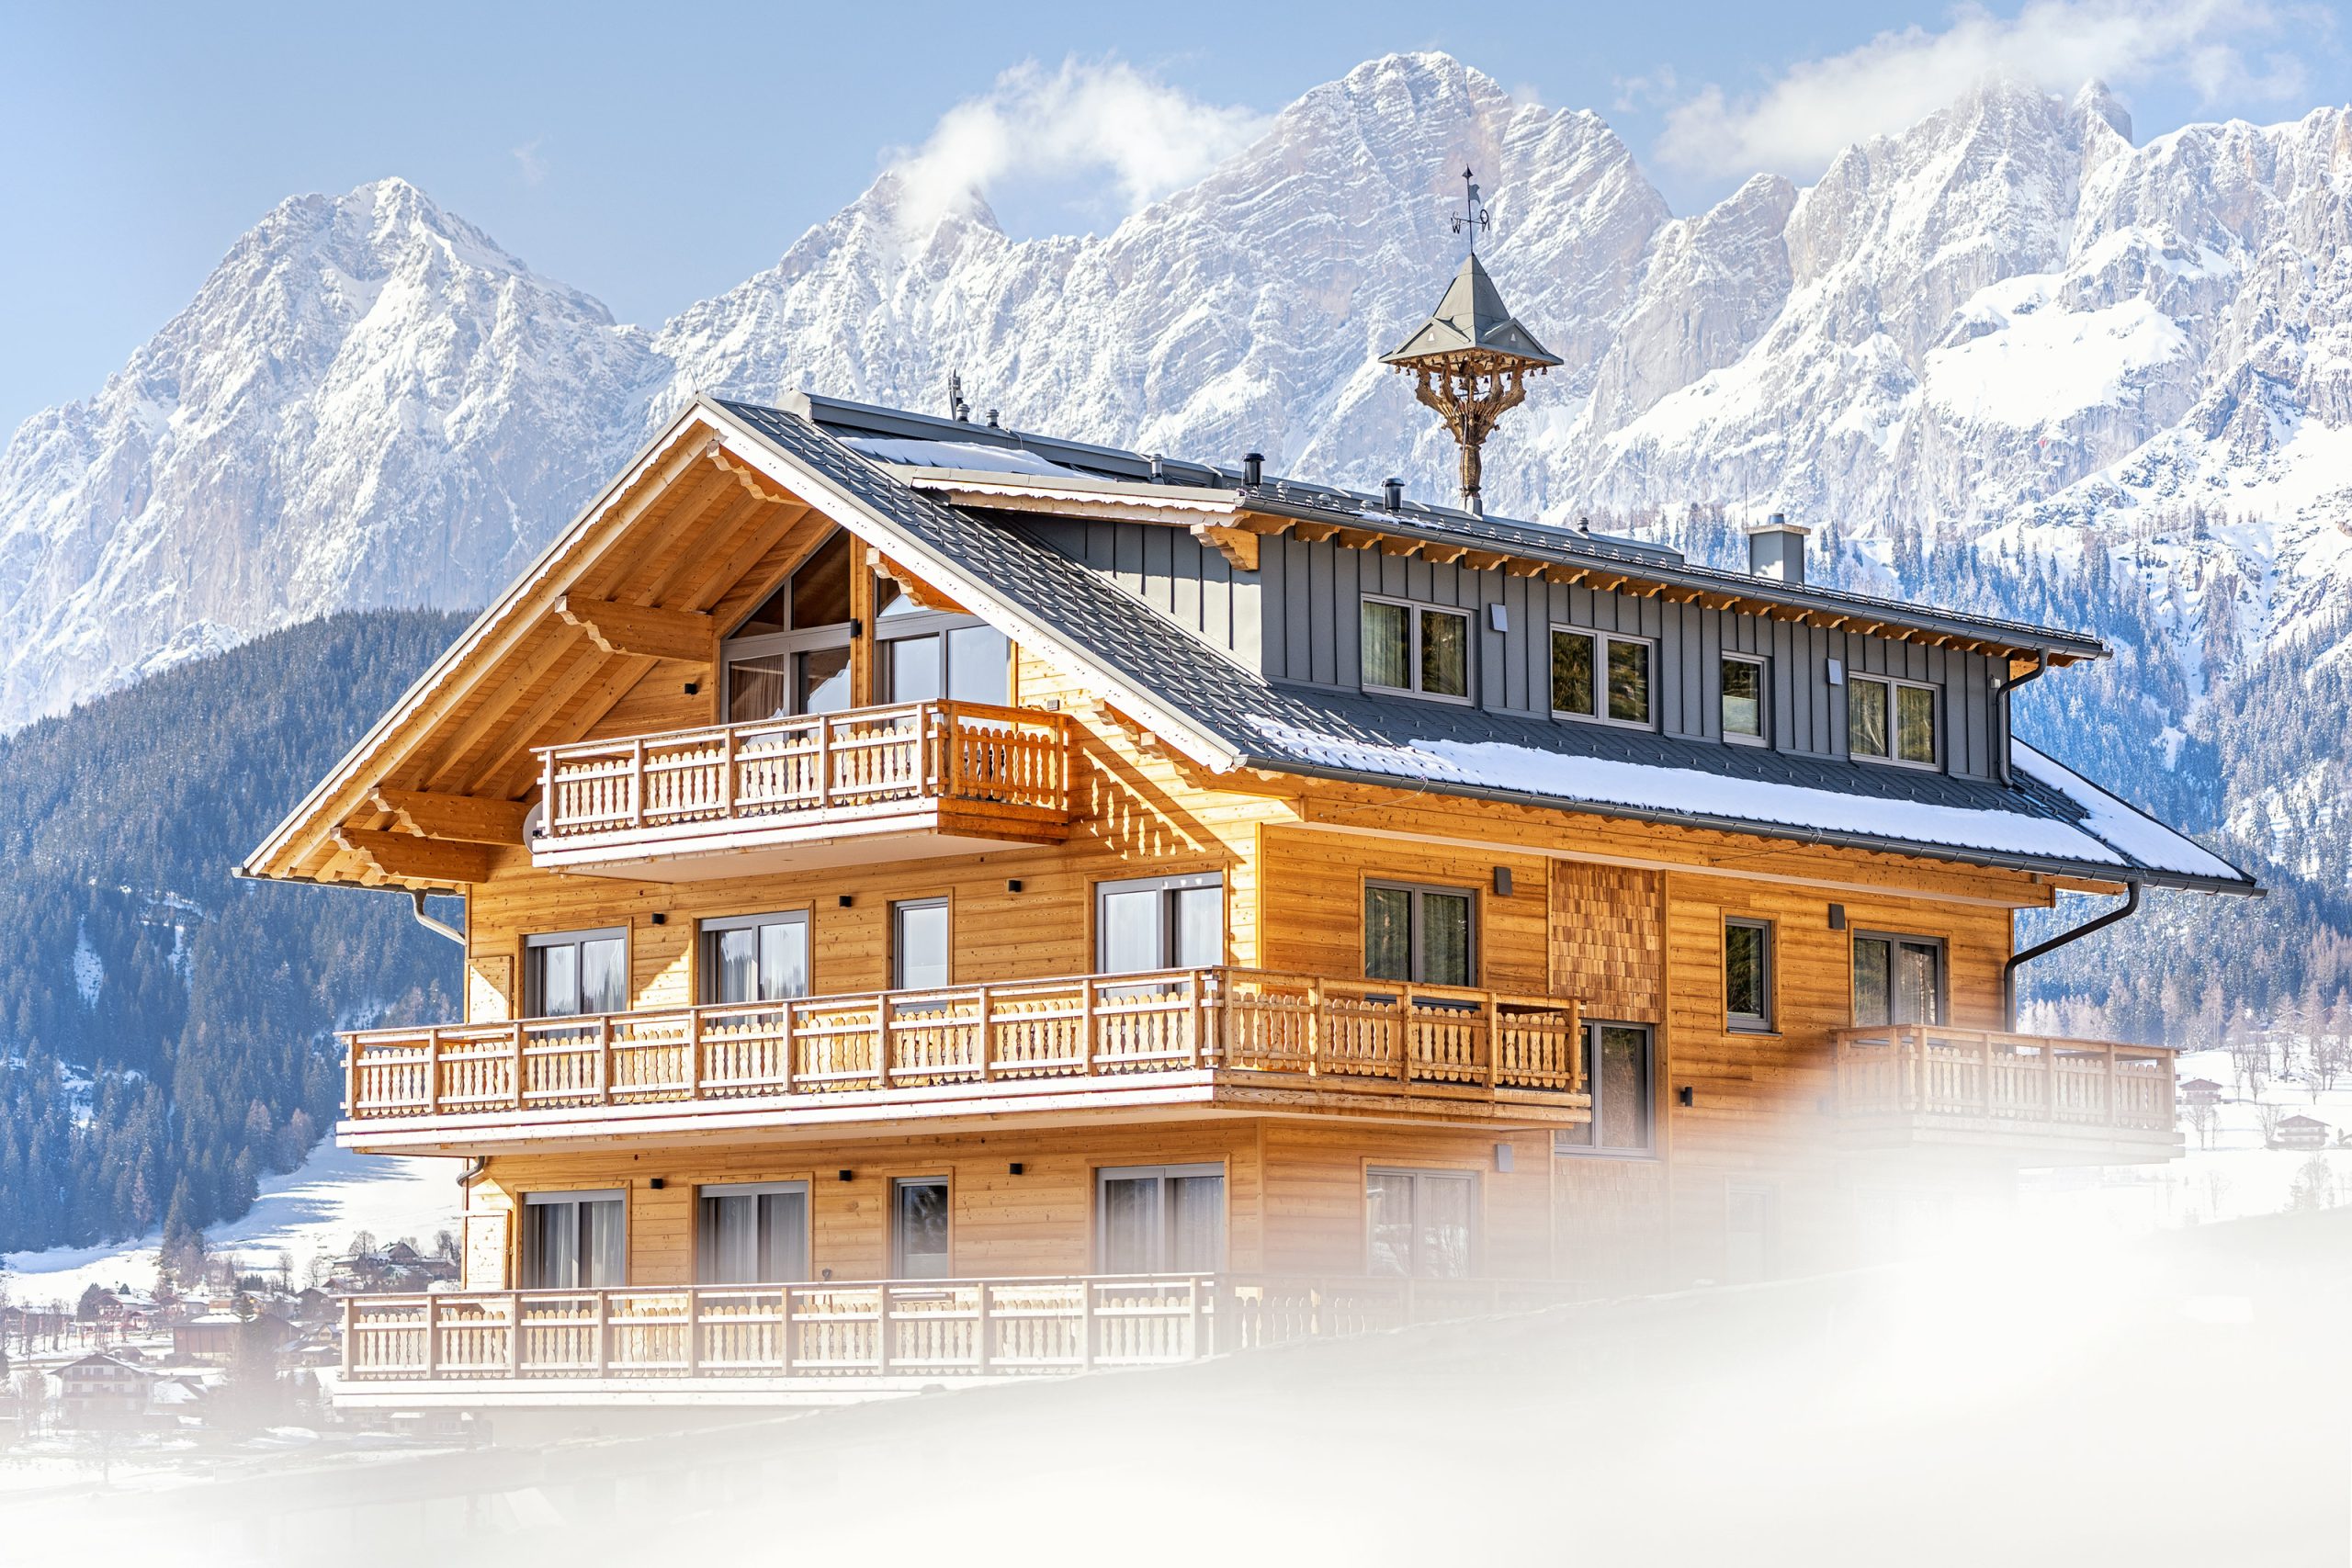 The Hotel at Dachstein: A New Austrian Adventure post thumbnail image